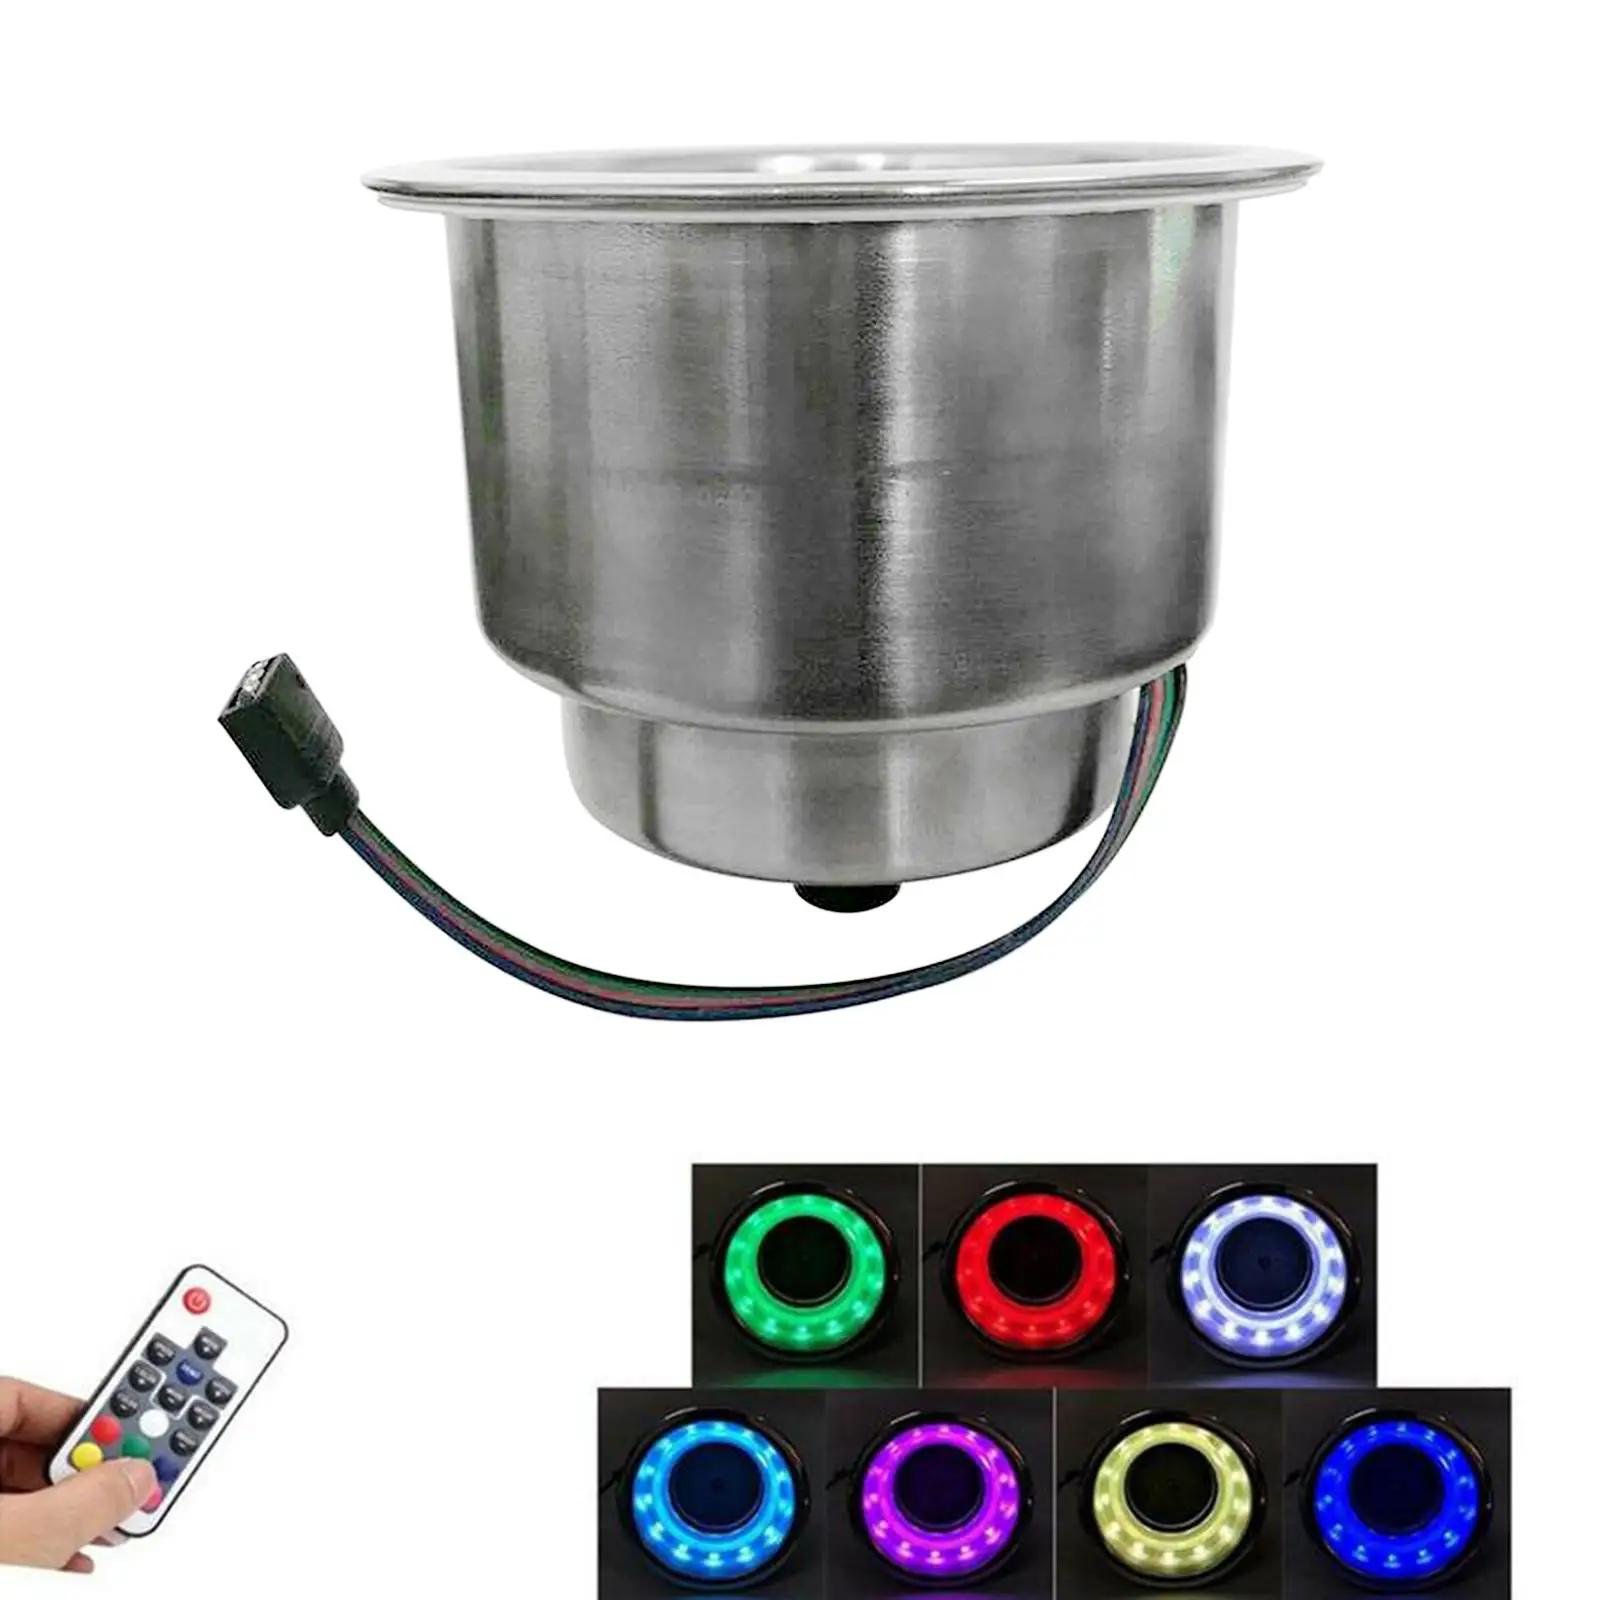 RGB LED Light Stainless Steel Drinking Cup Holder with Remote Control for Marine